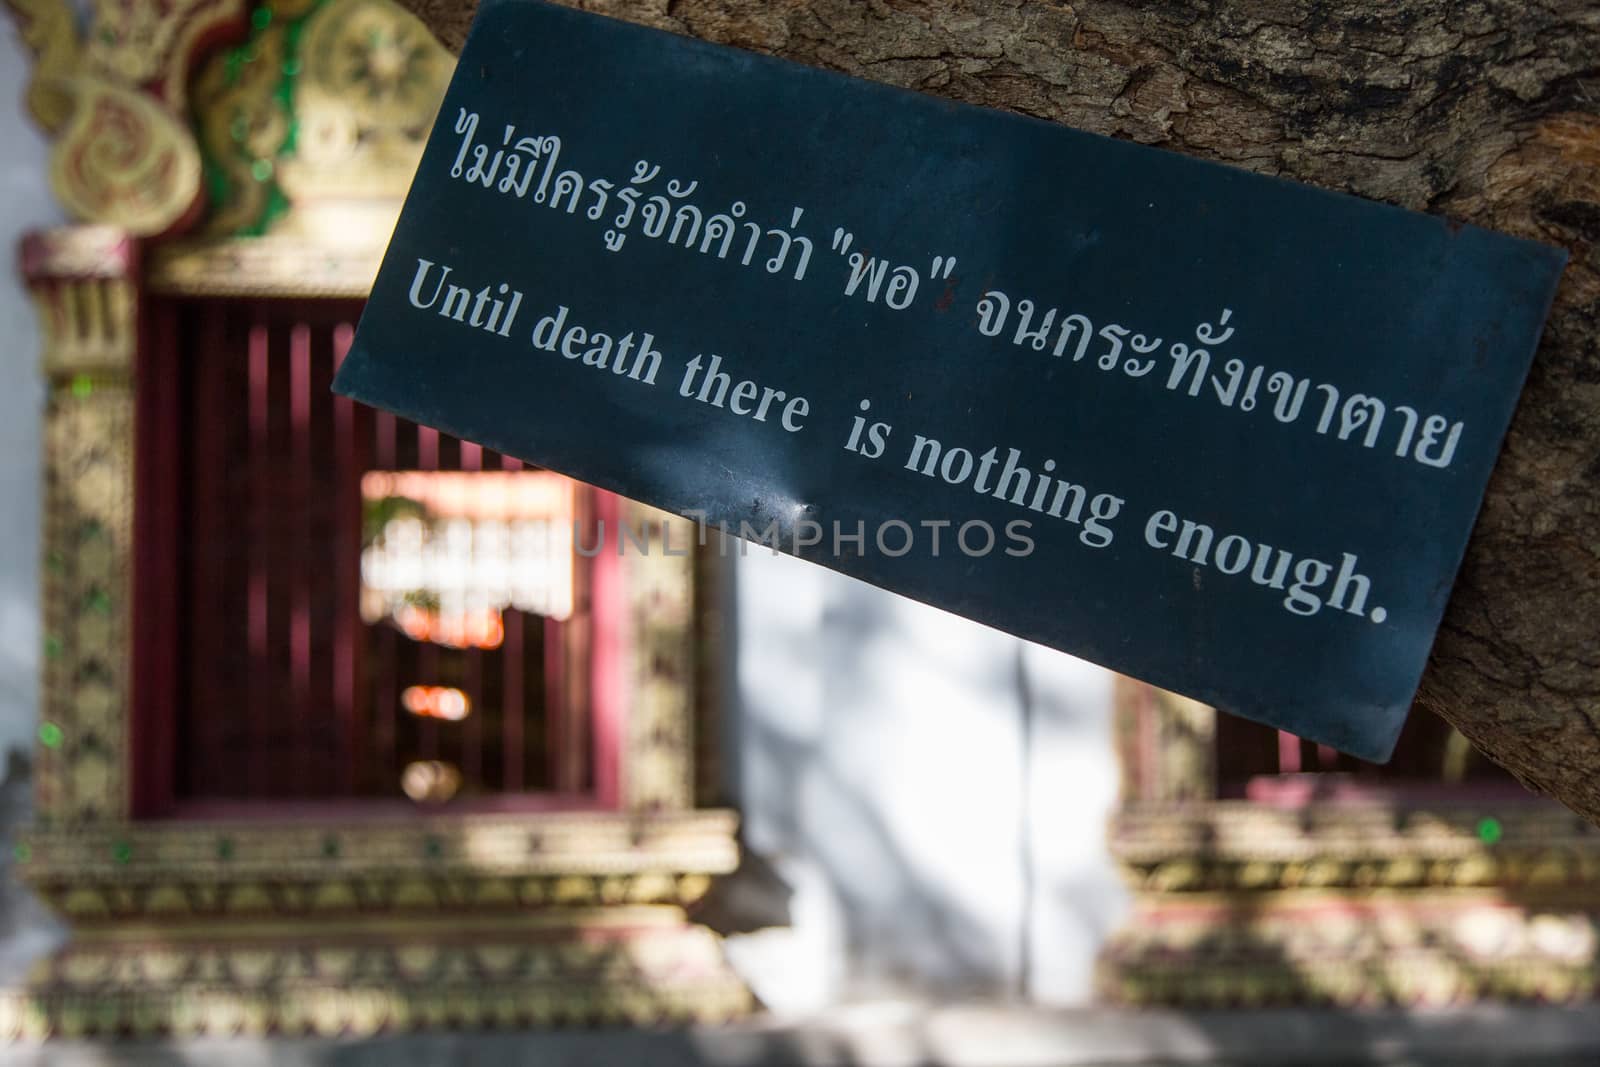 Until Death There Is Nothing saying by Buddha on sign temple garden Chiang Mai. High quality photo